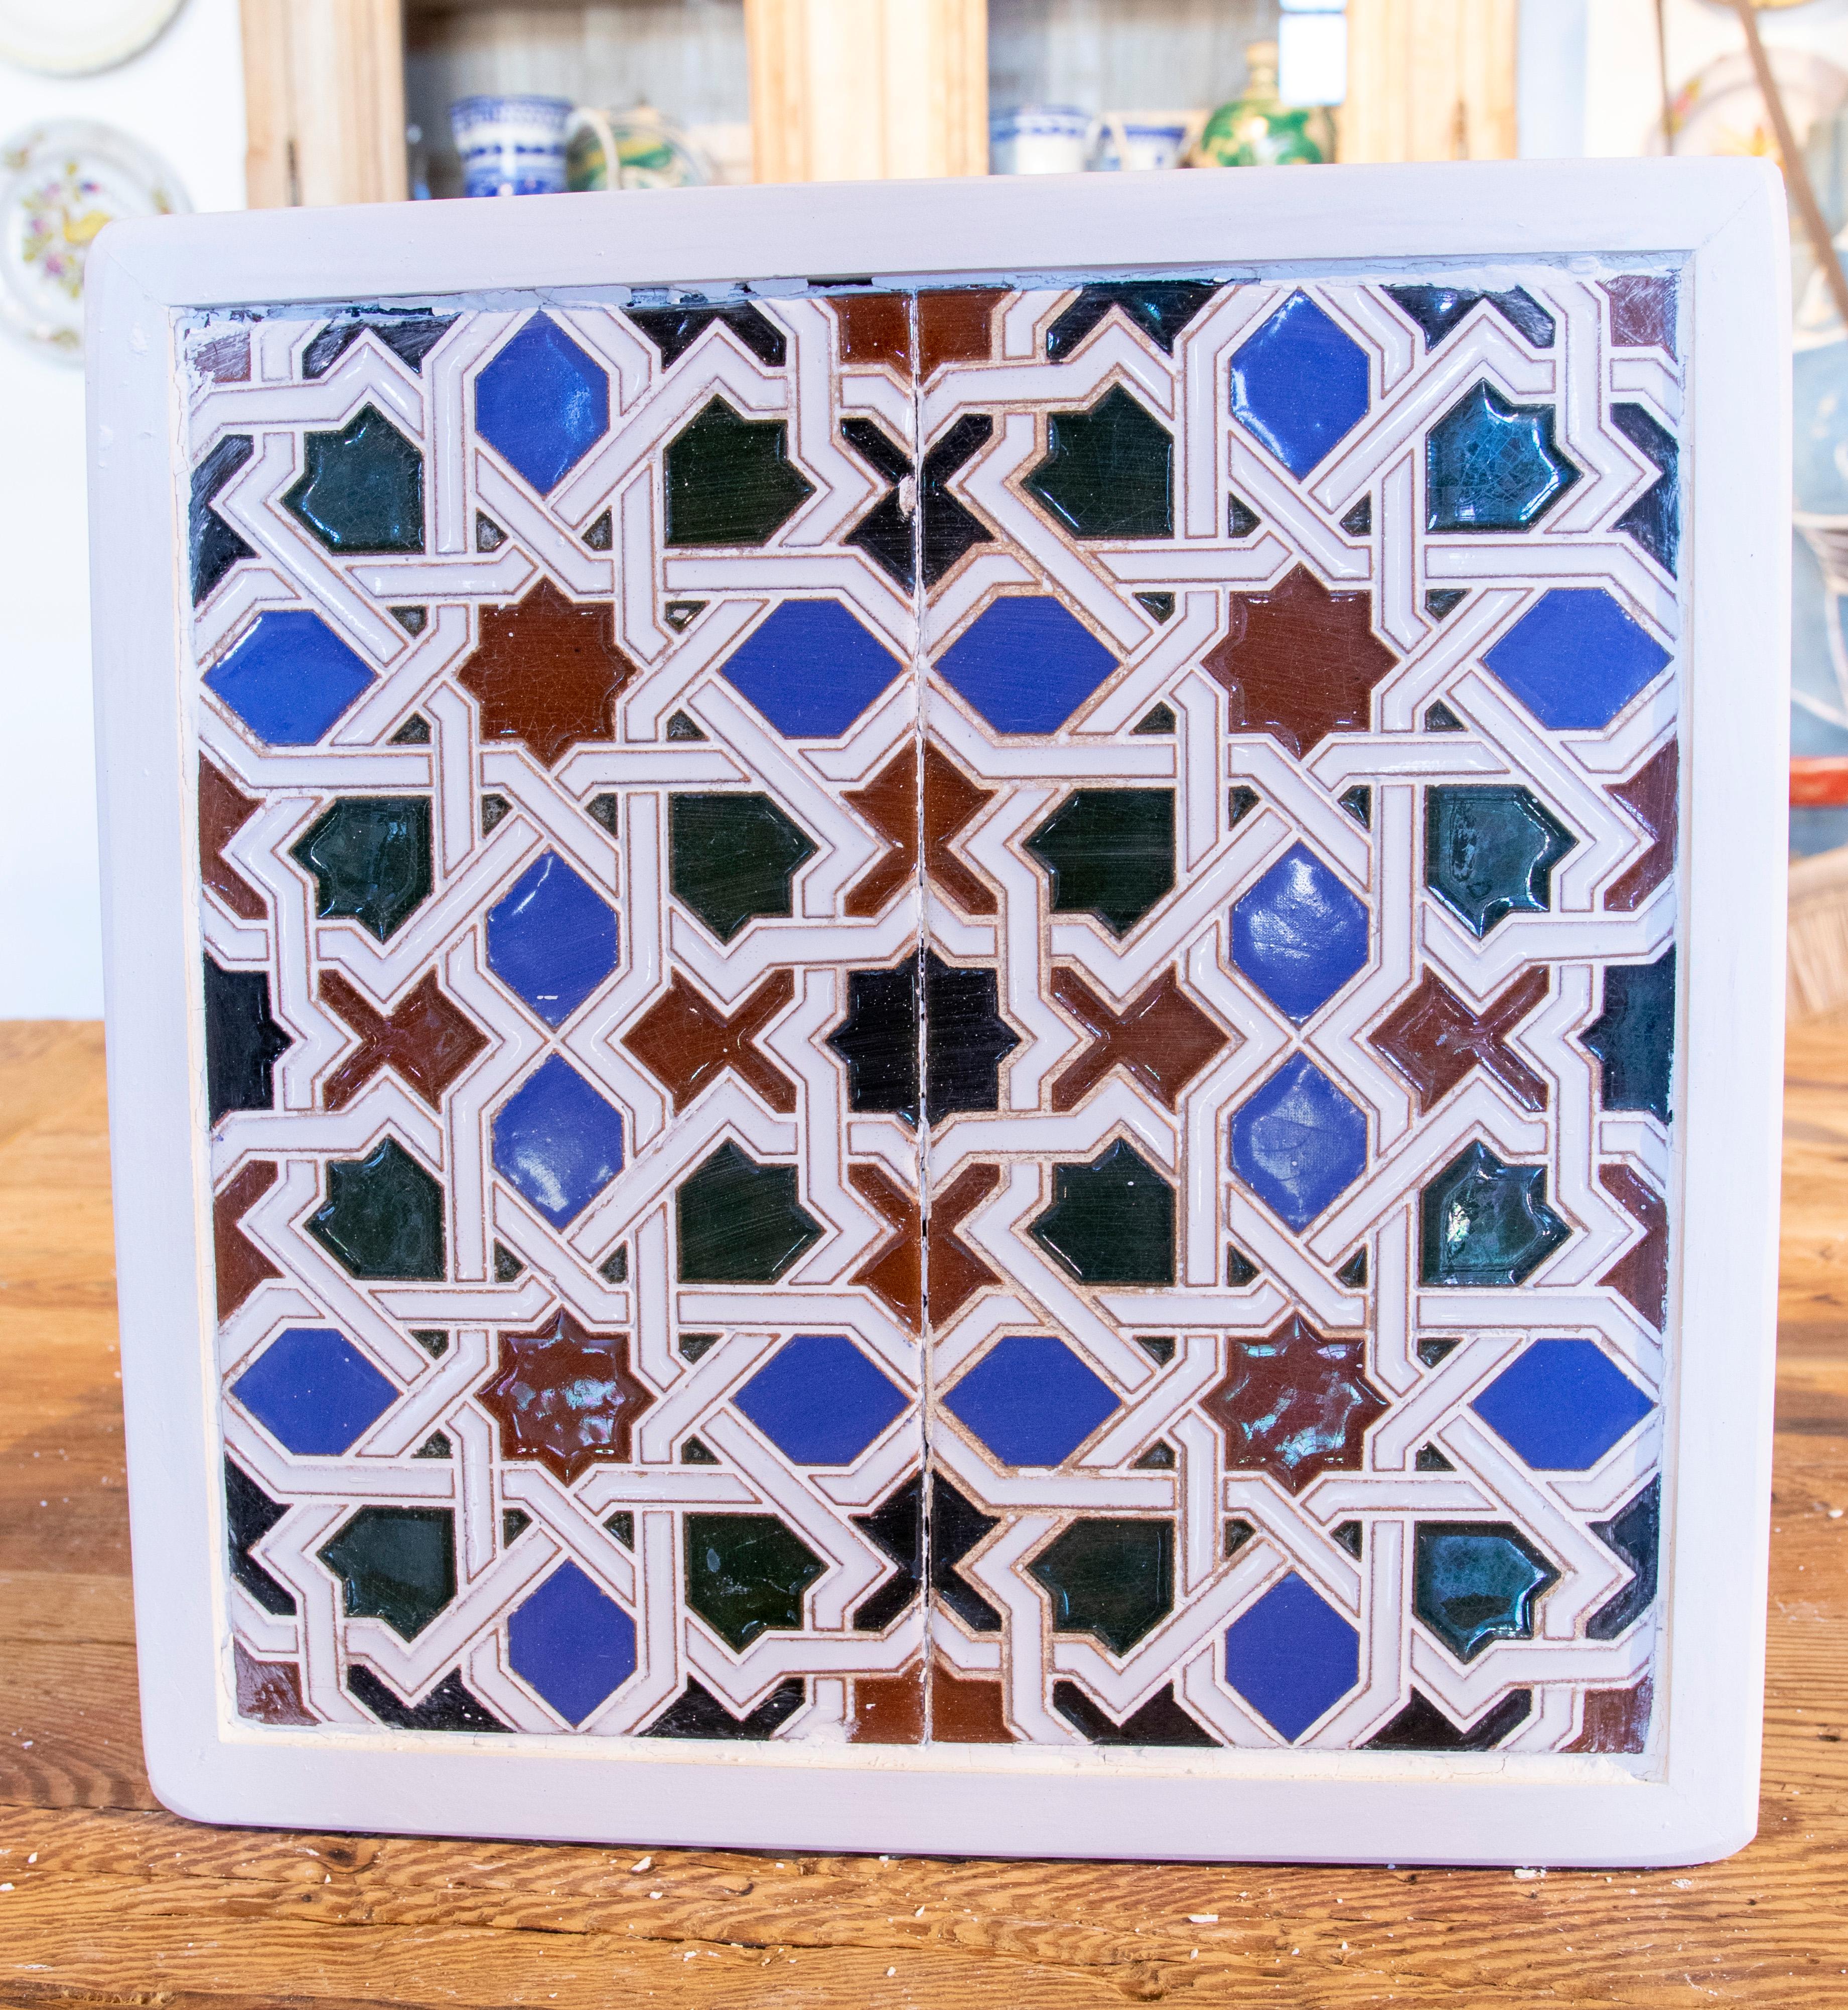 1950s Spanish decorative tile framed in wood in different colors